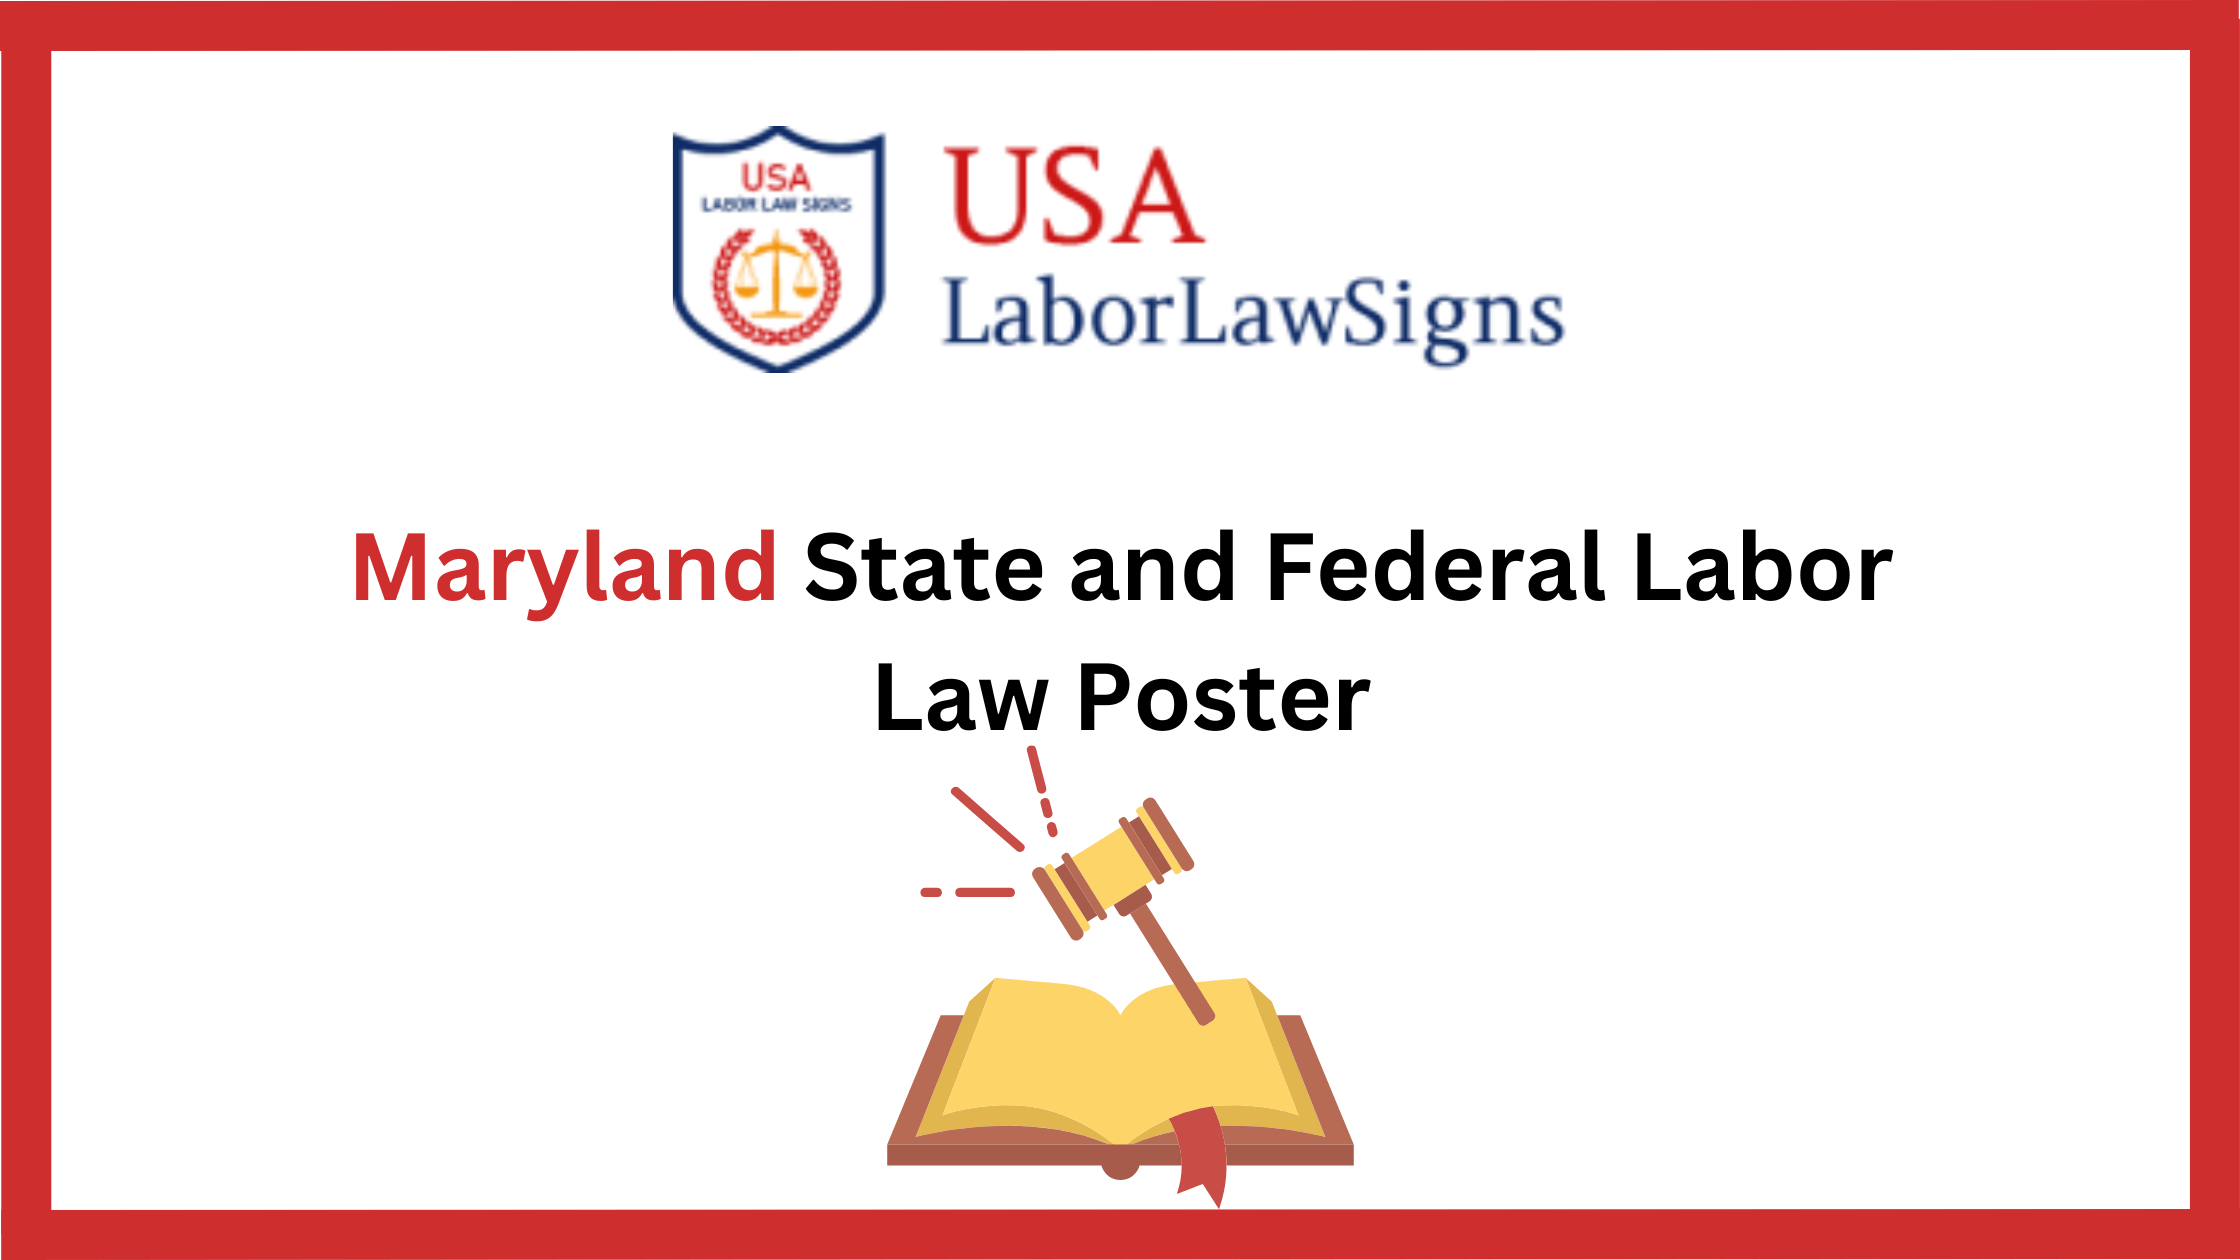 Common Violations of Maryland State and Federal Labor Laws